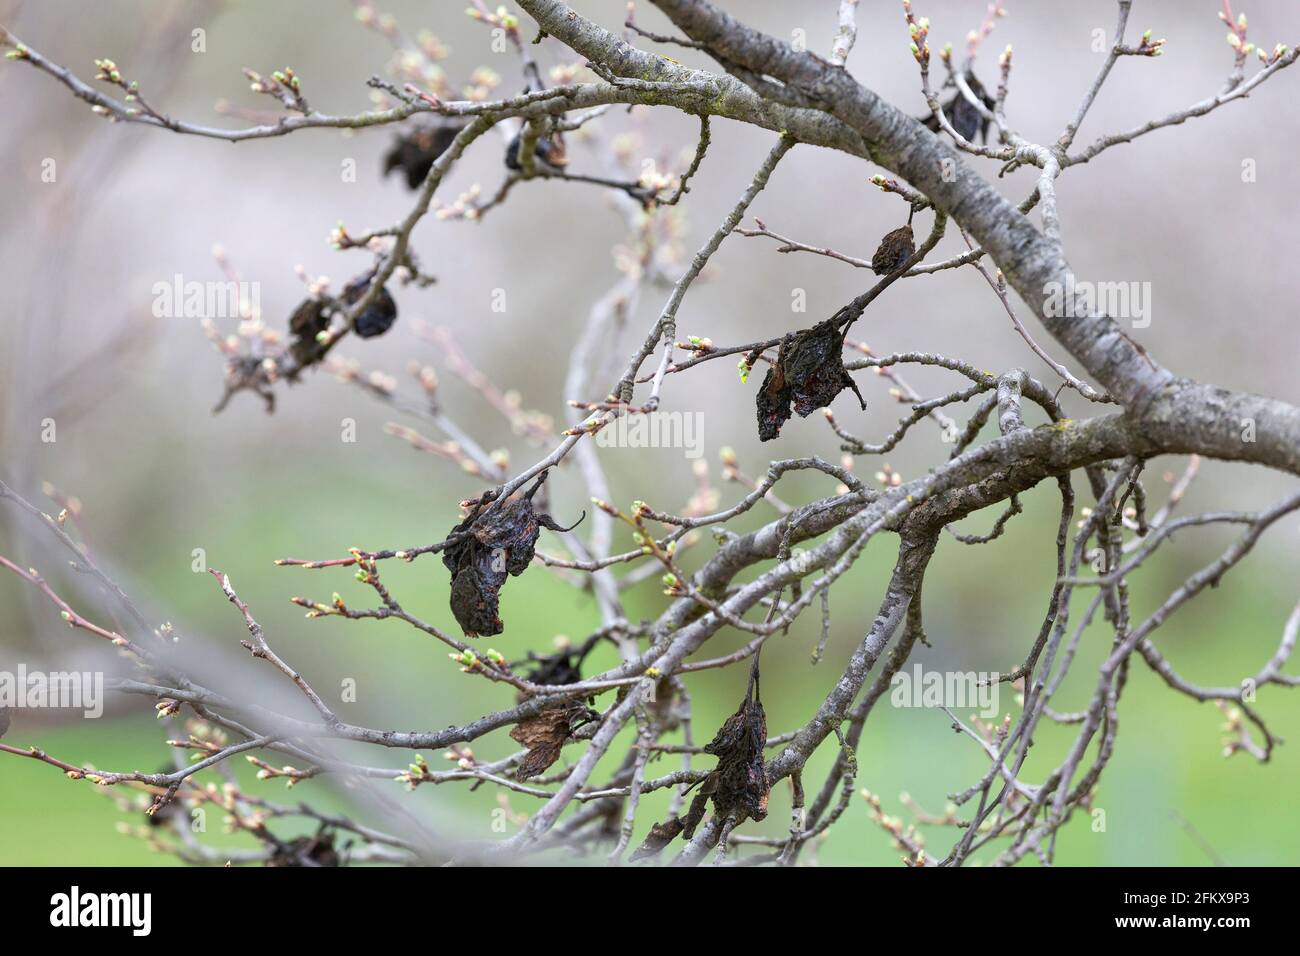 Plum Tree In Spring With Withered Fruits, Fruit Mummies Stock Photo